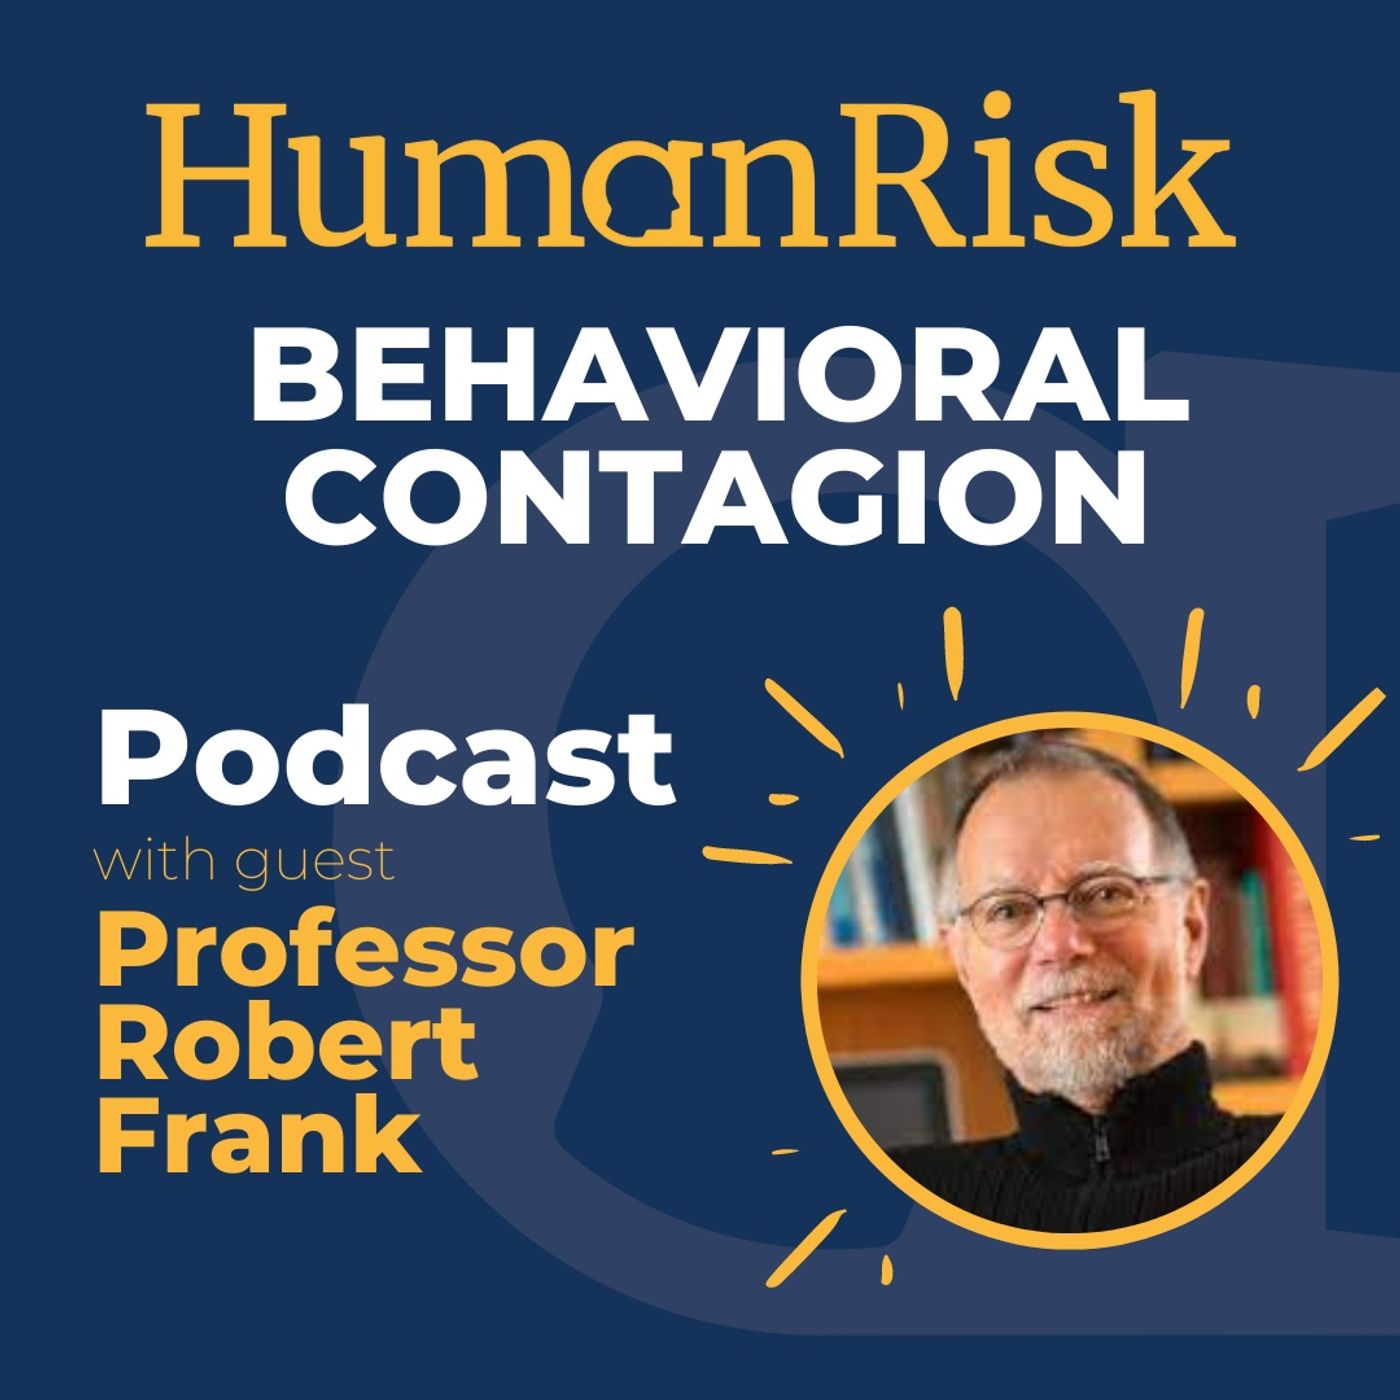 Professor Robert Frank on Behavioral Contagion - why we're so easily influenced by others